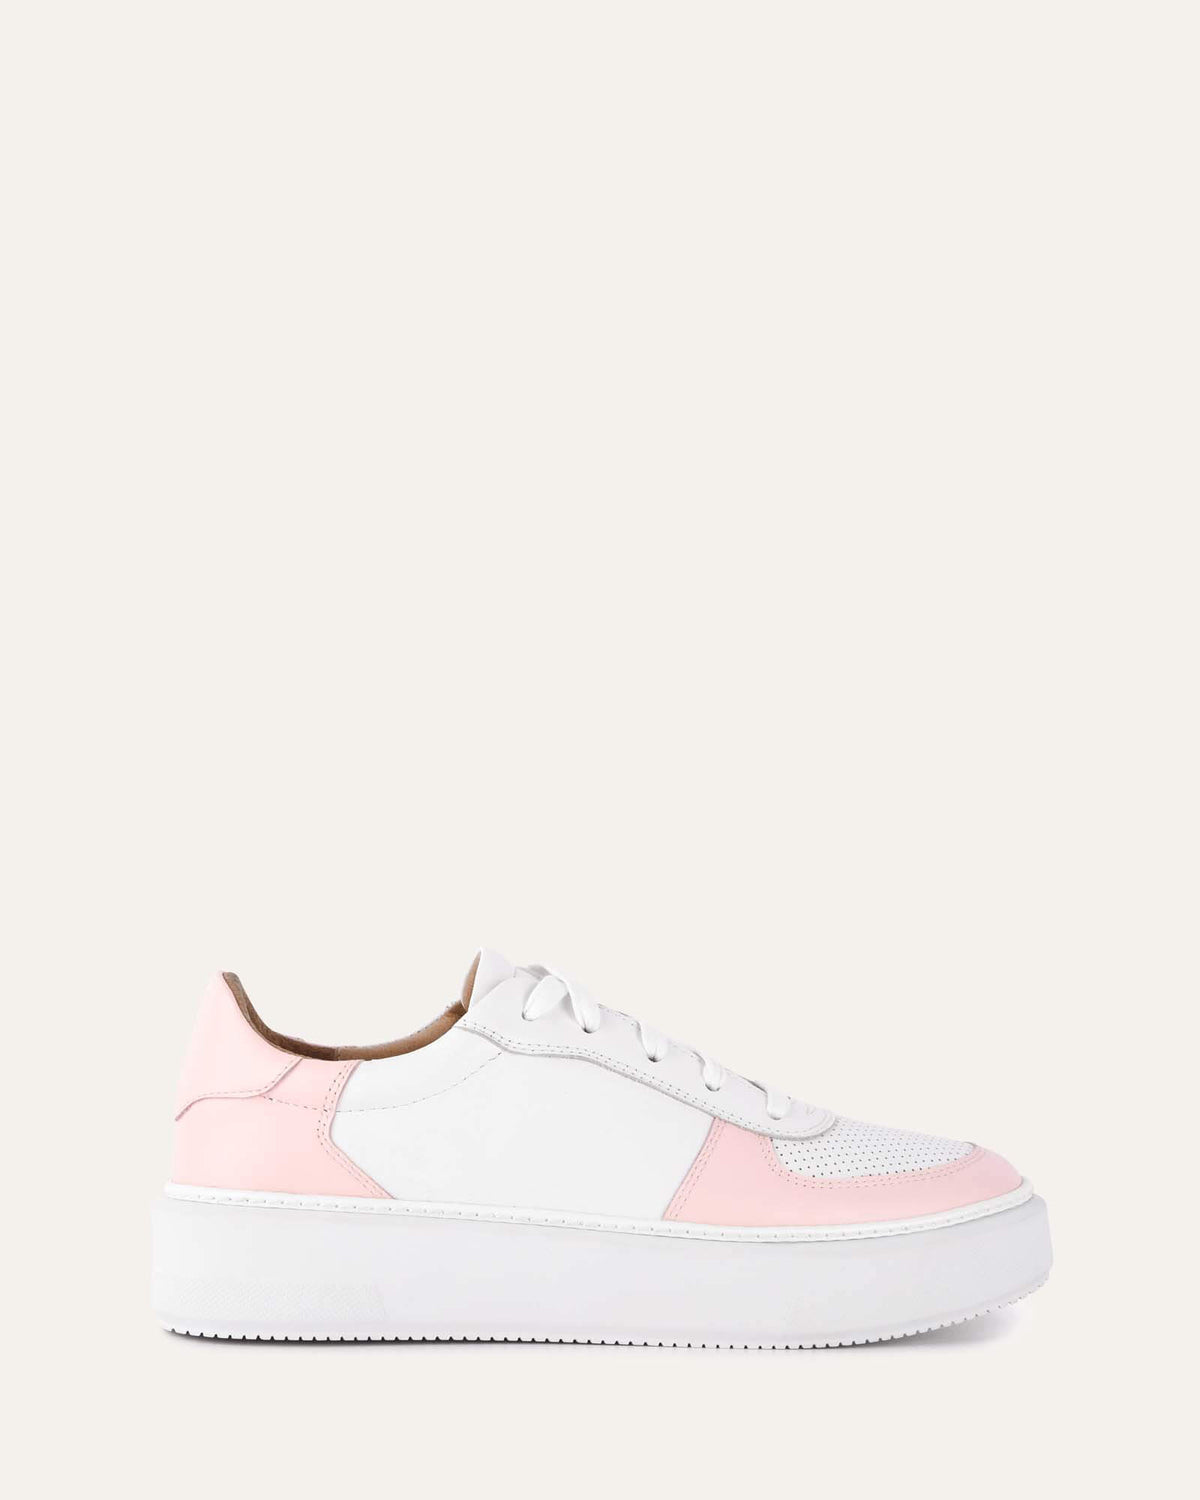 OTTO SNEAKERS WHITE SOFT PINK LEATHER